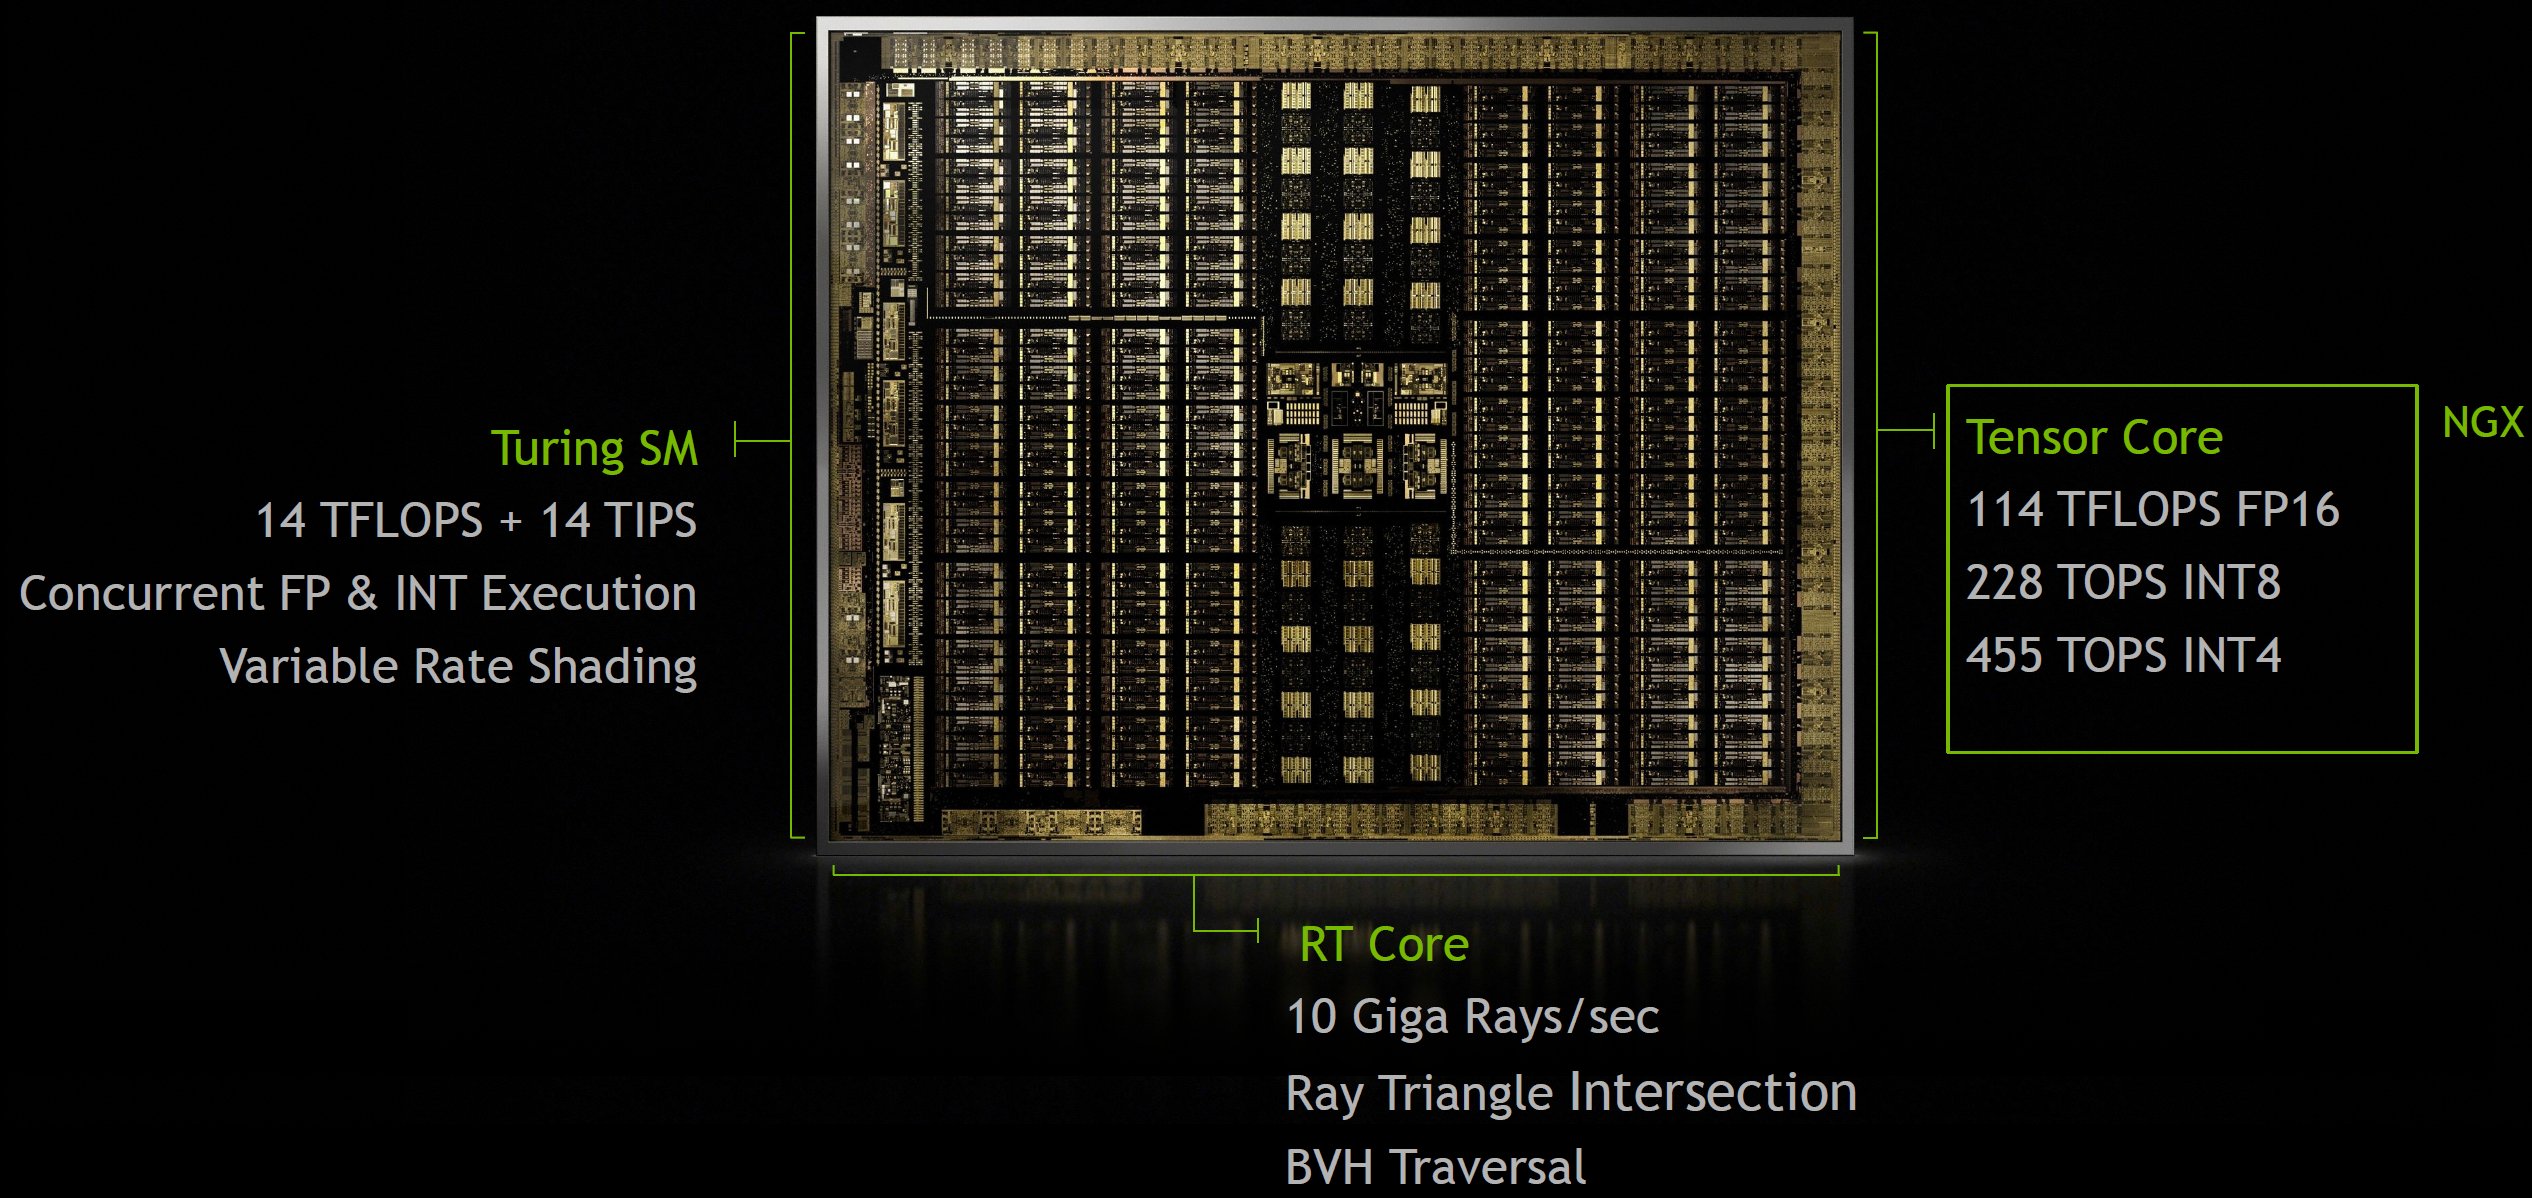 Nvidia GeForce RTX 2080 Ti and RTX 2080 unveiled - what turing really all about | Page 9 | igor'sLAB